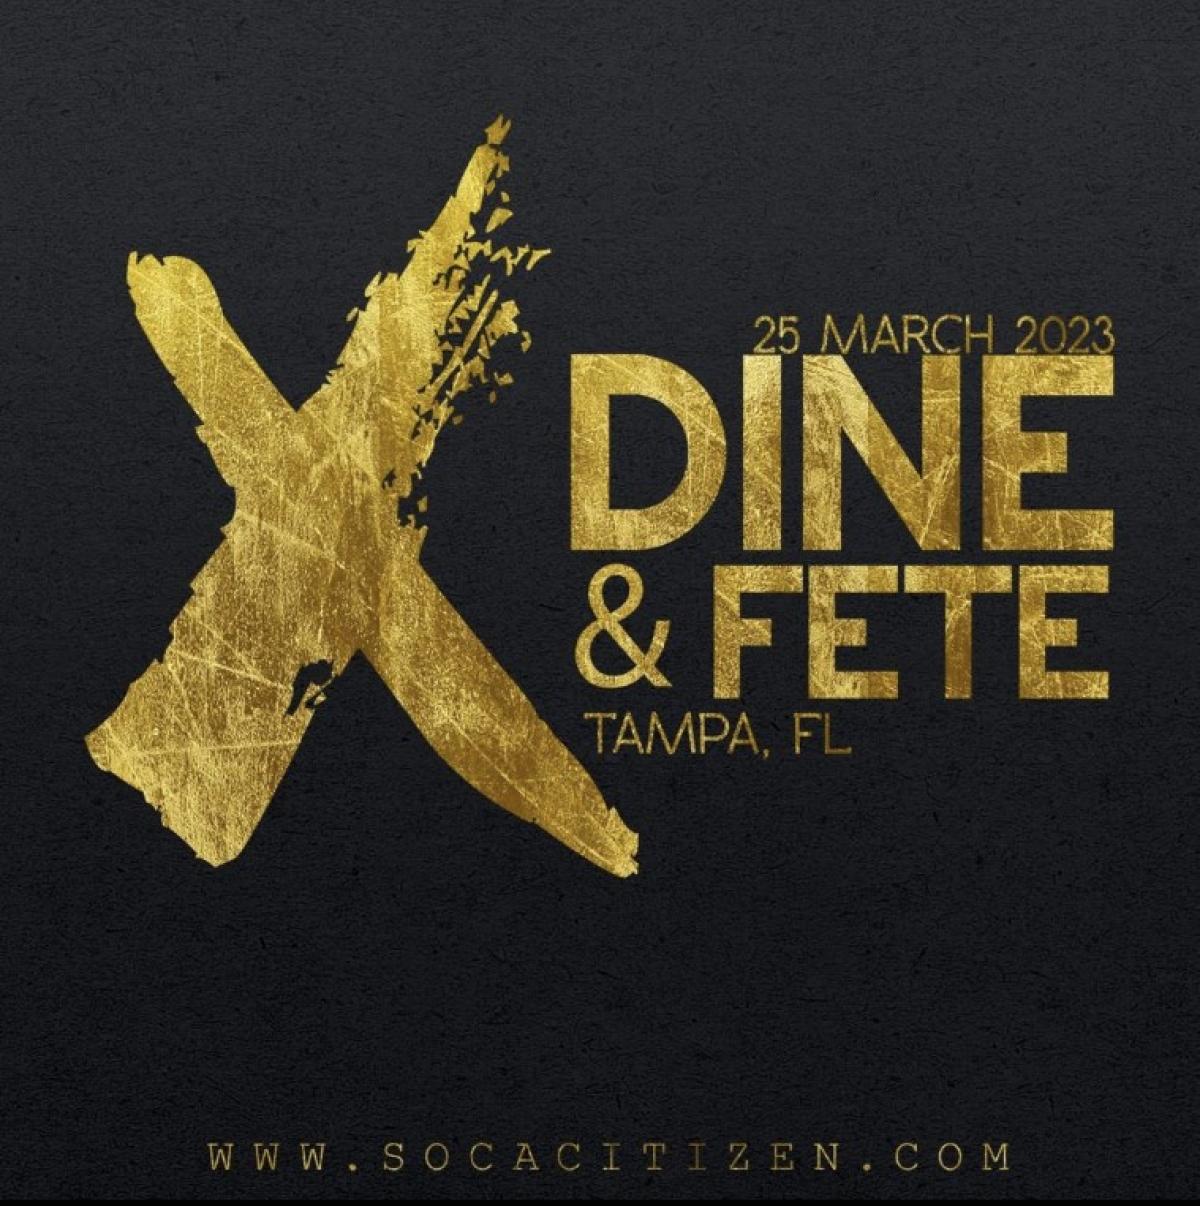 Dine & Fete flyer or graphic.